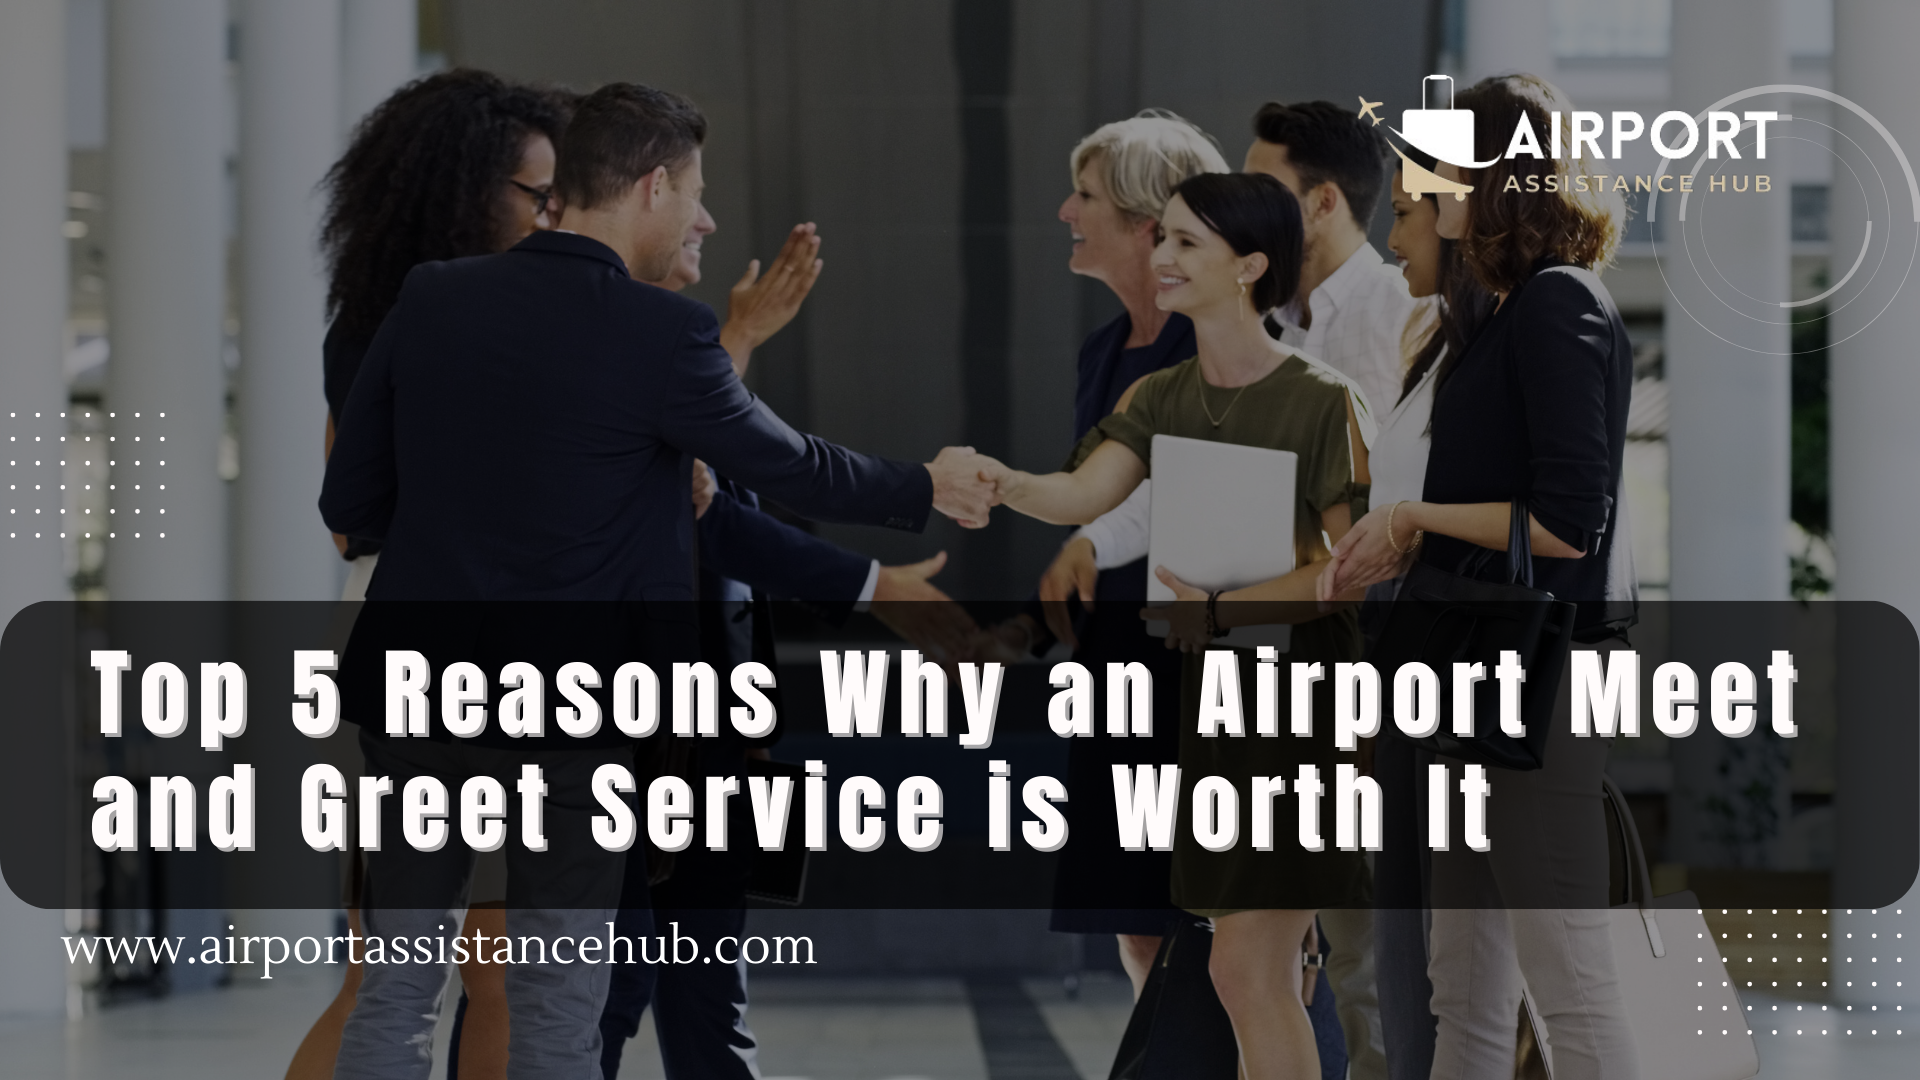 Top 5 Reasons Why an Airport Meet and Greet Service is Worth It